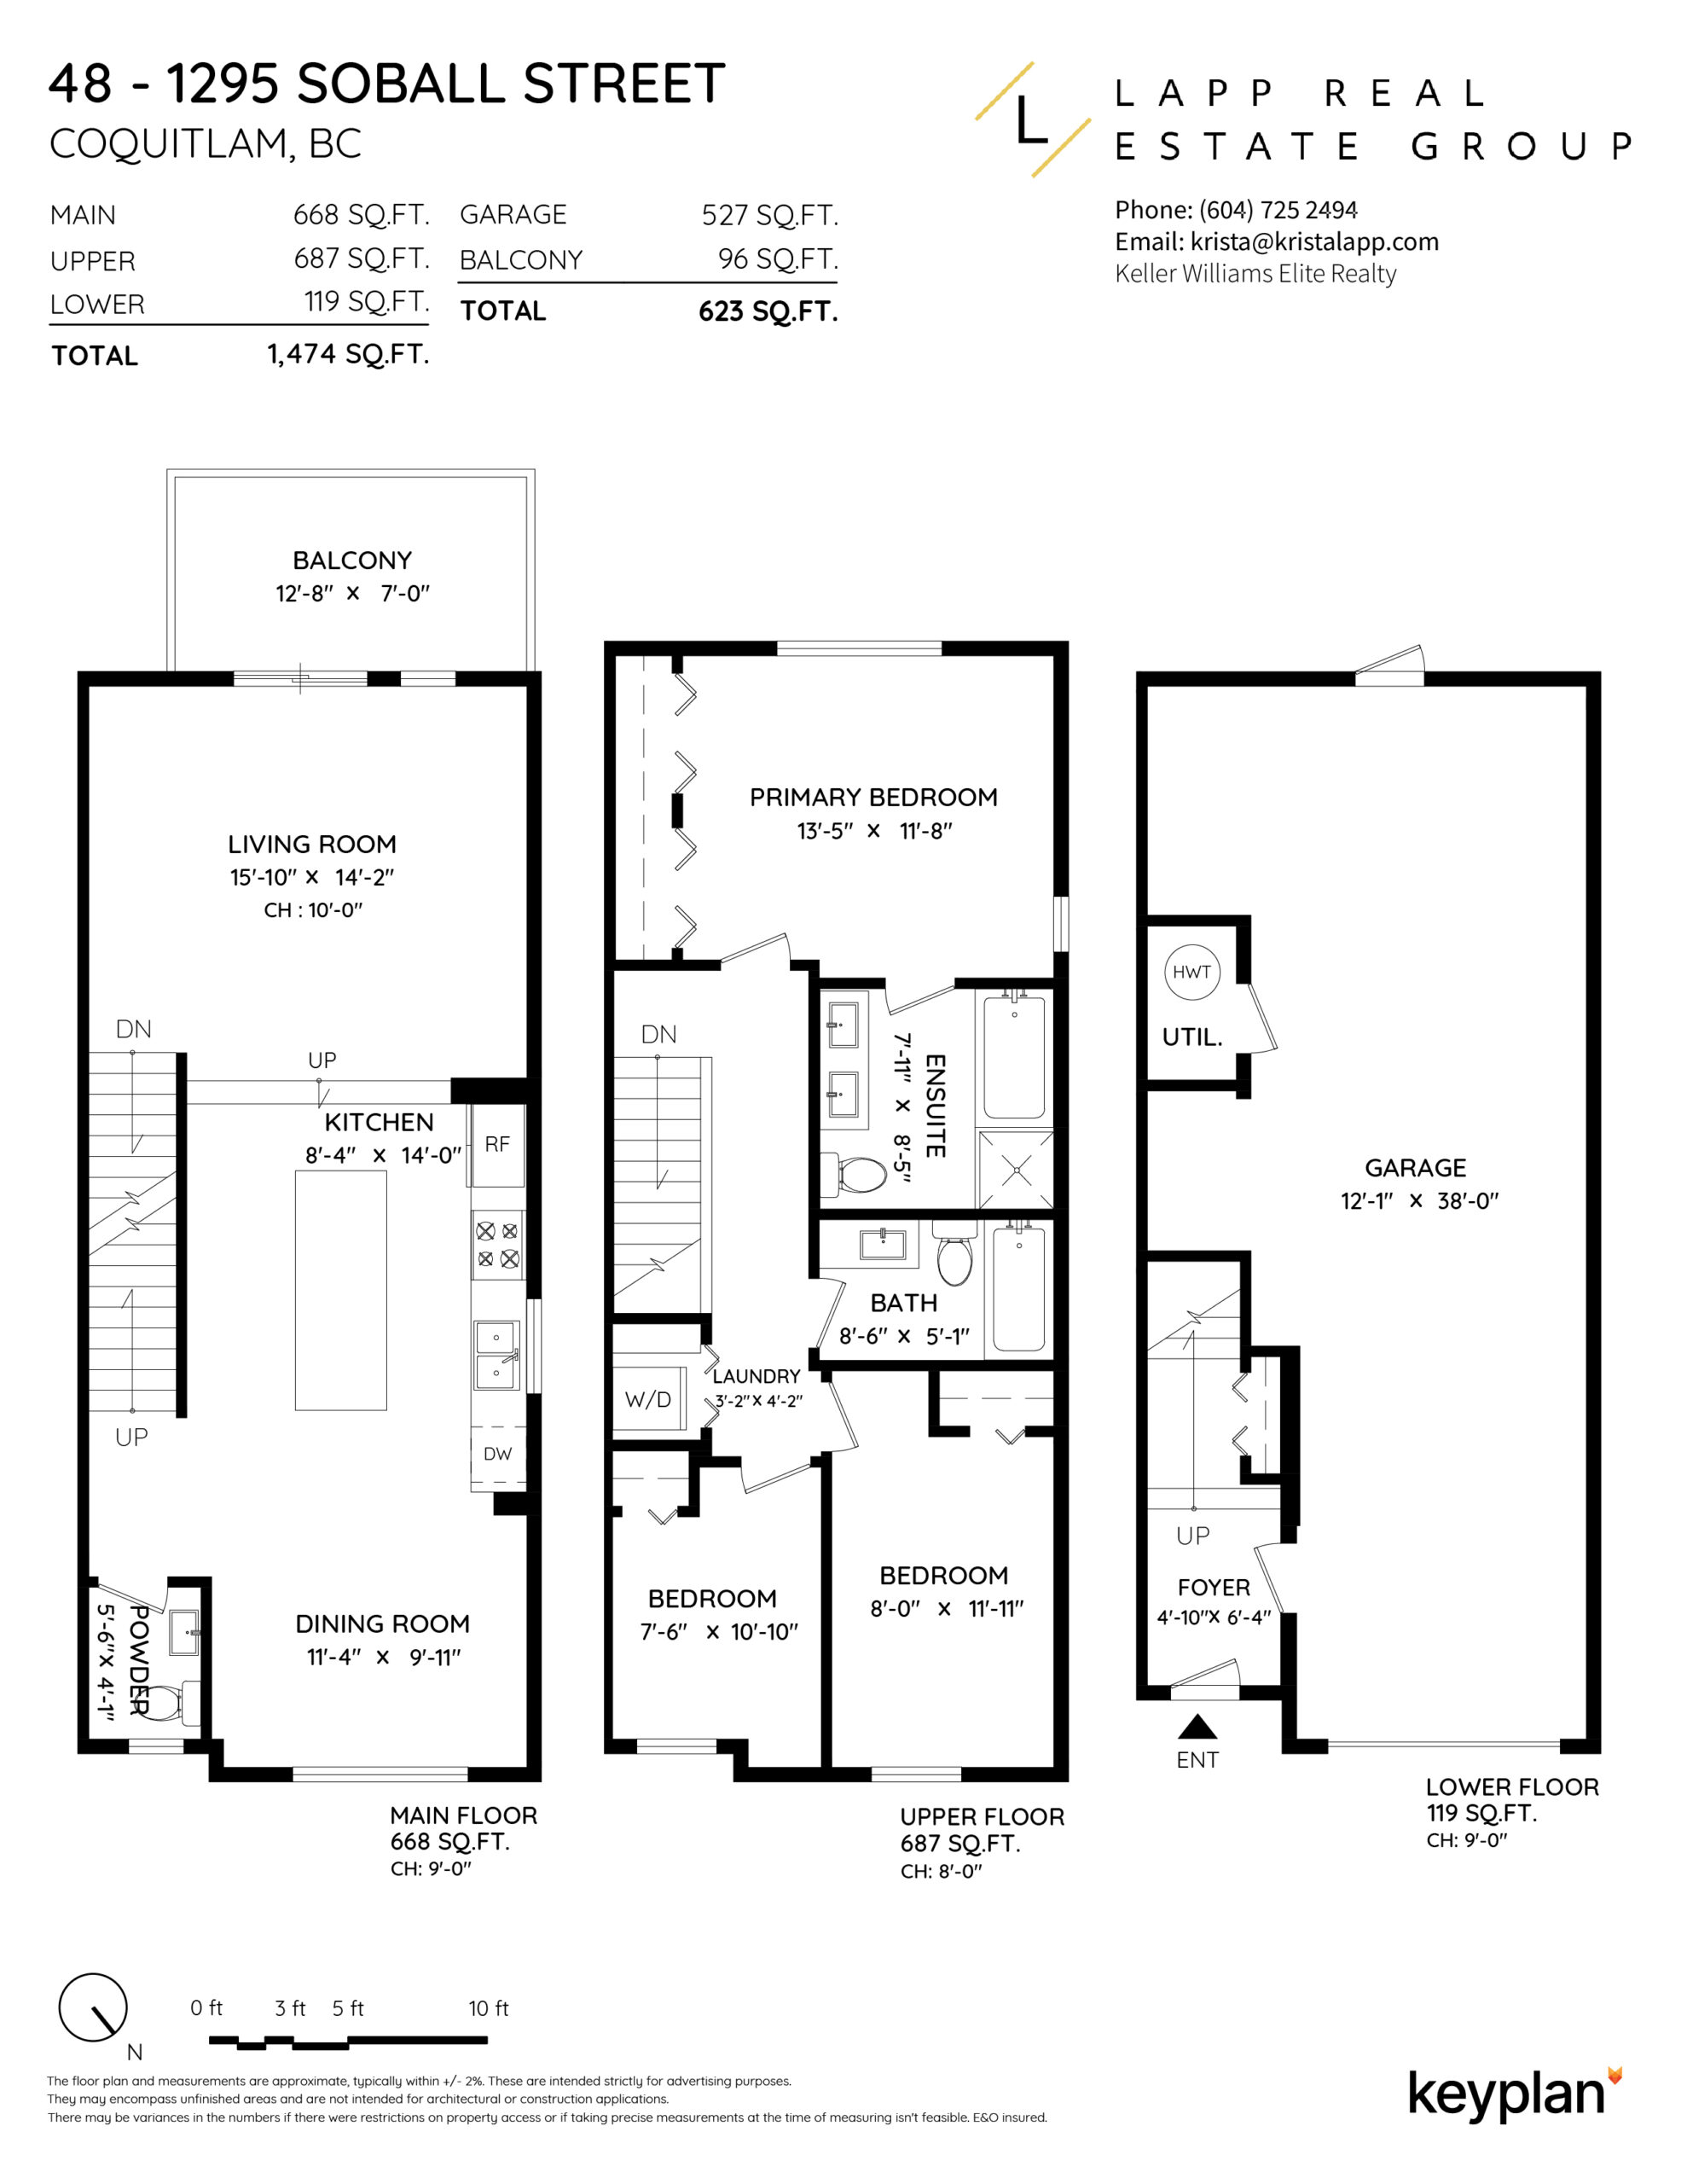 Floor plan Burke Mountain Townhome For Sale 48 1295 Soball St Coquitlam Krista Lapp